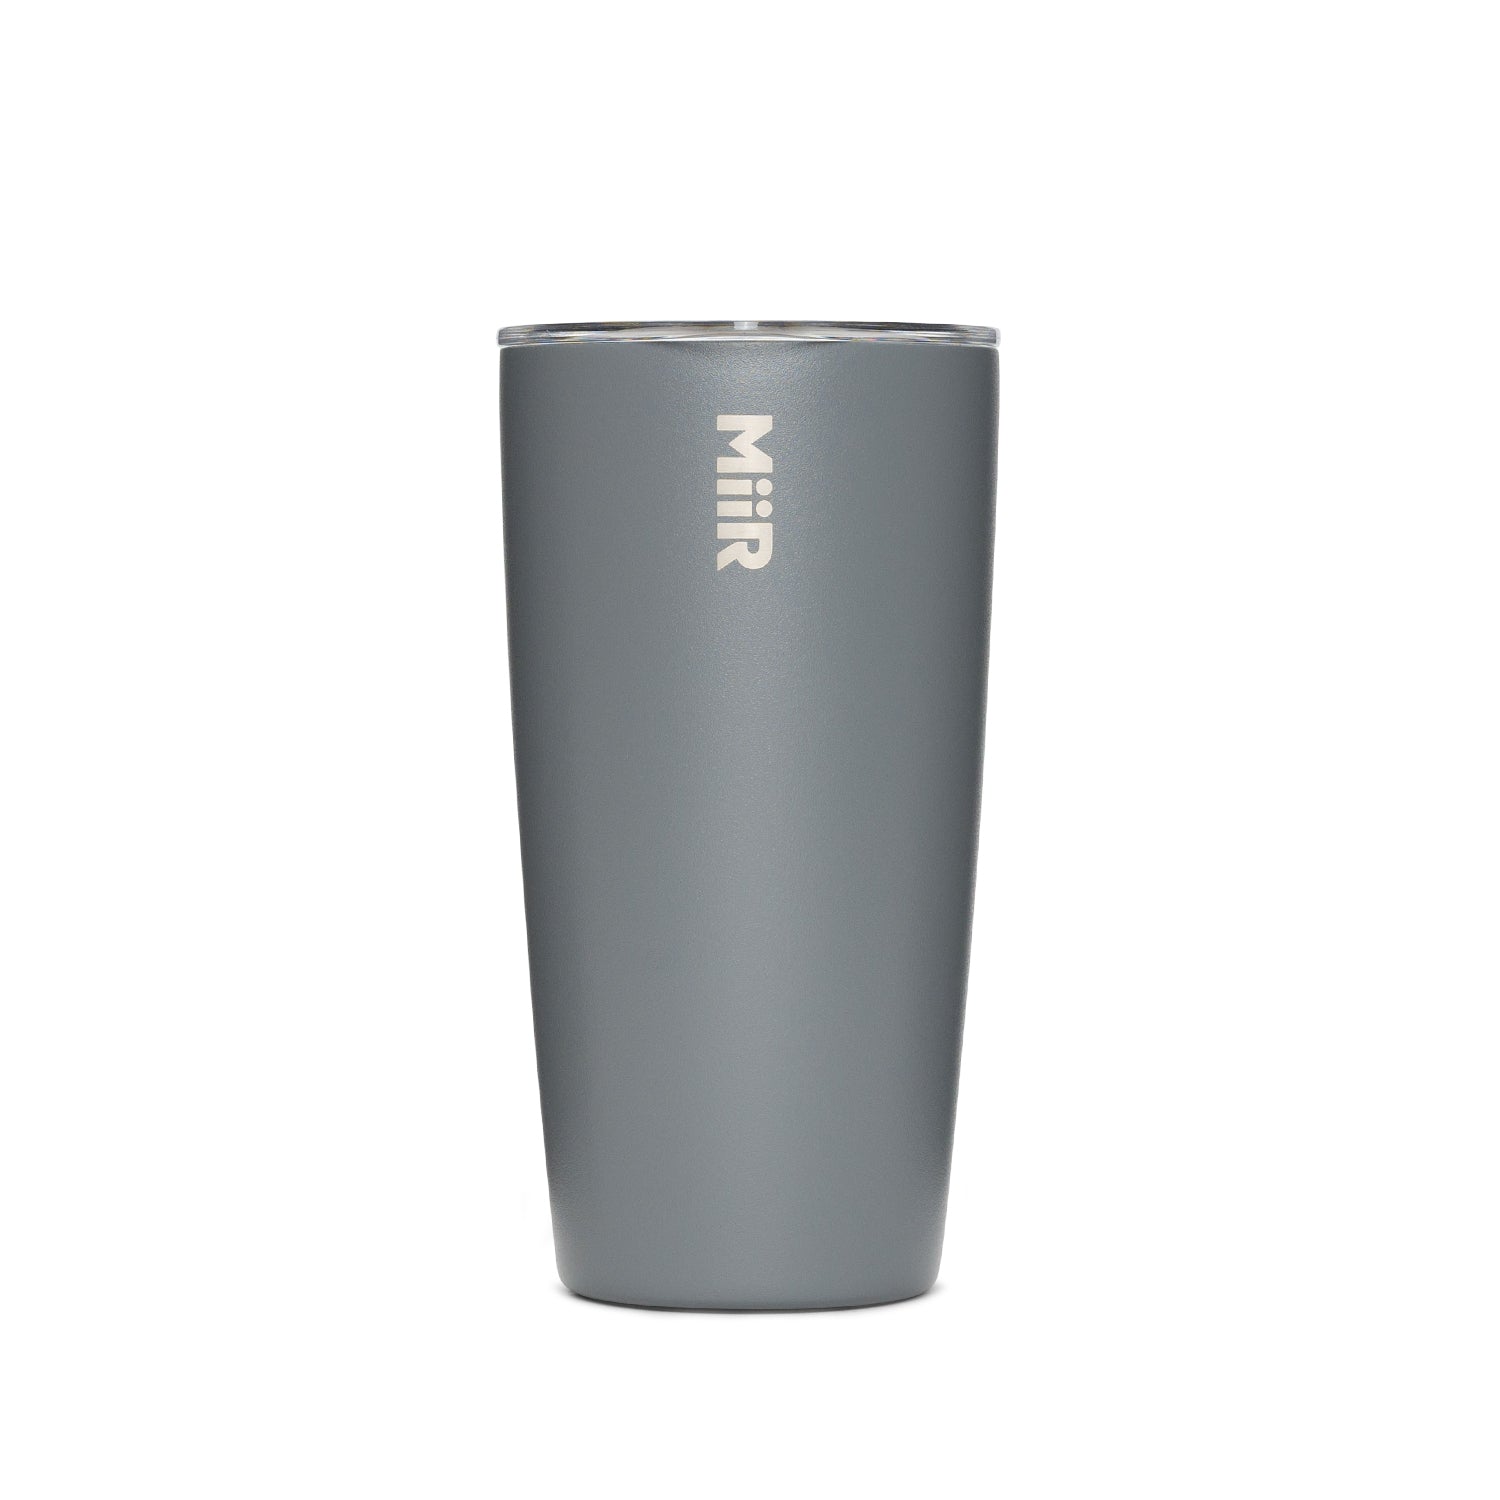 Micy - Plain Stainless Steel Tumbler